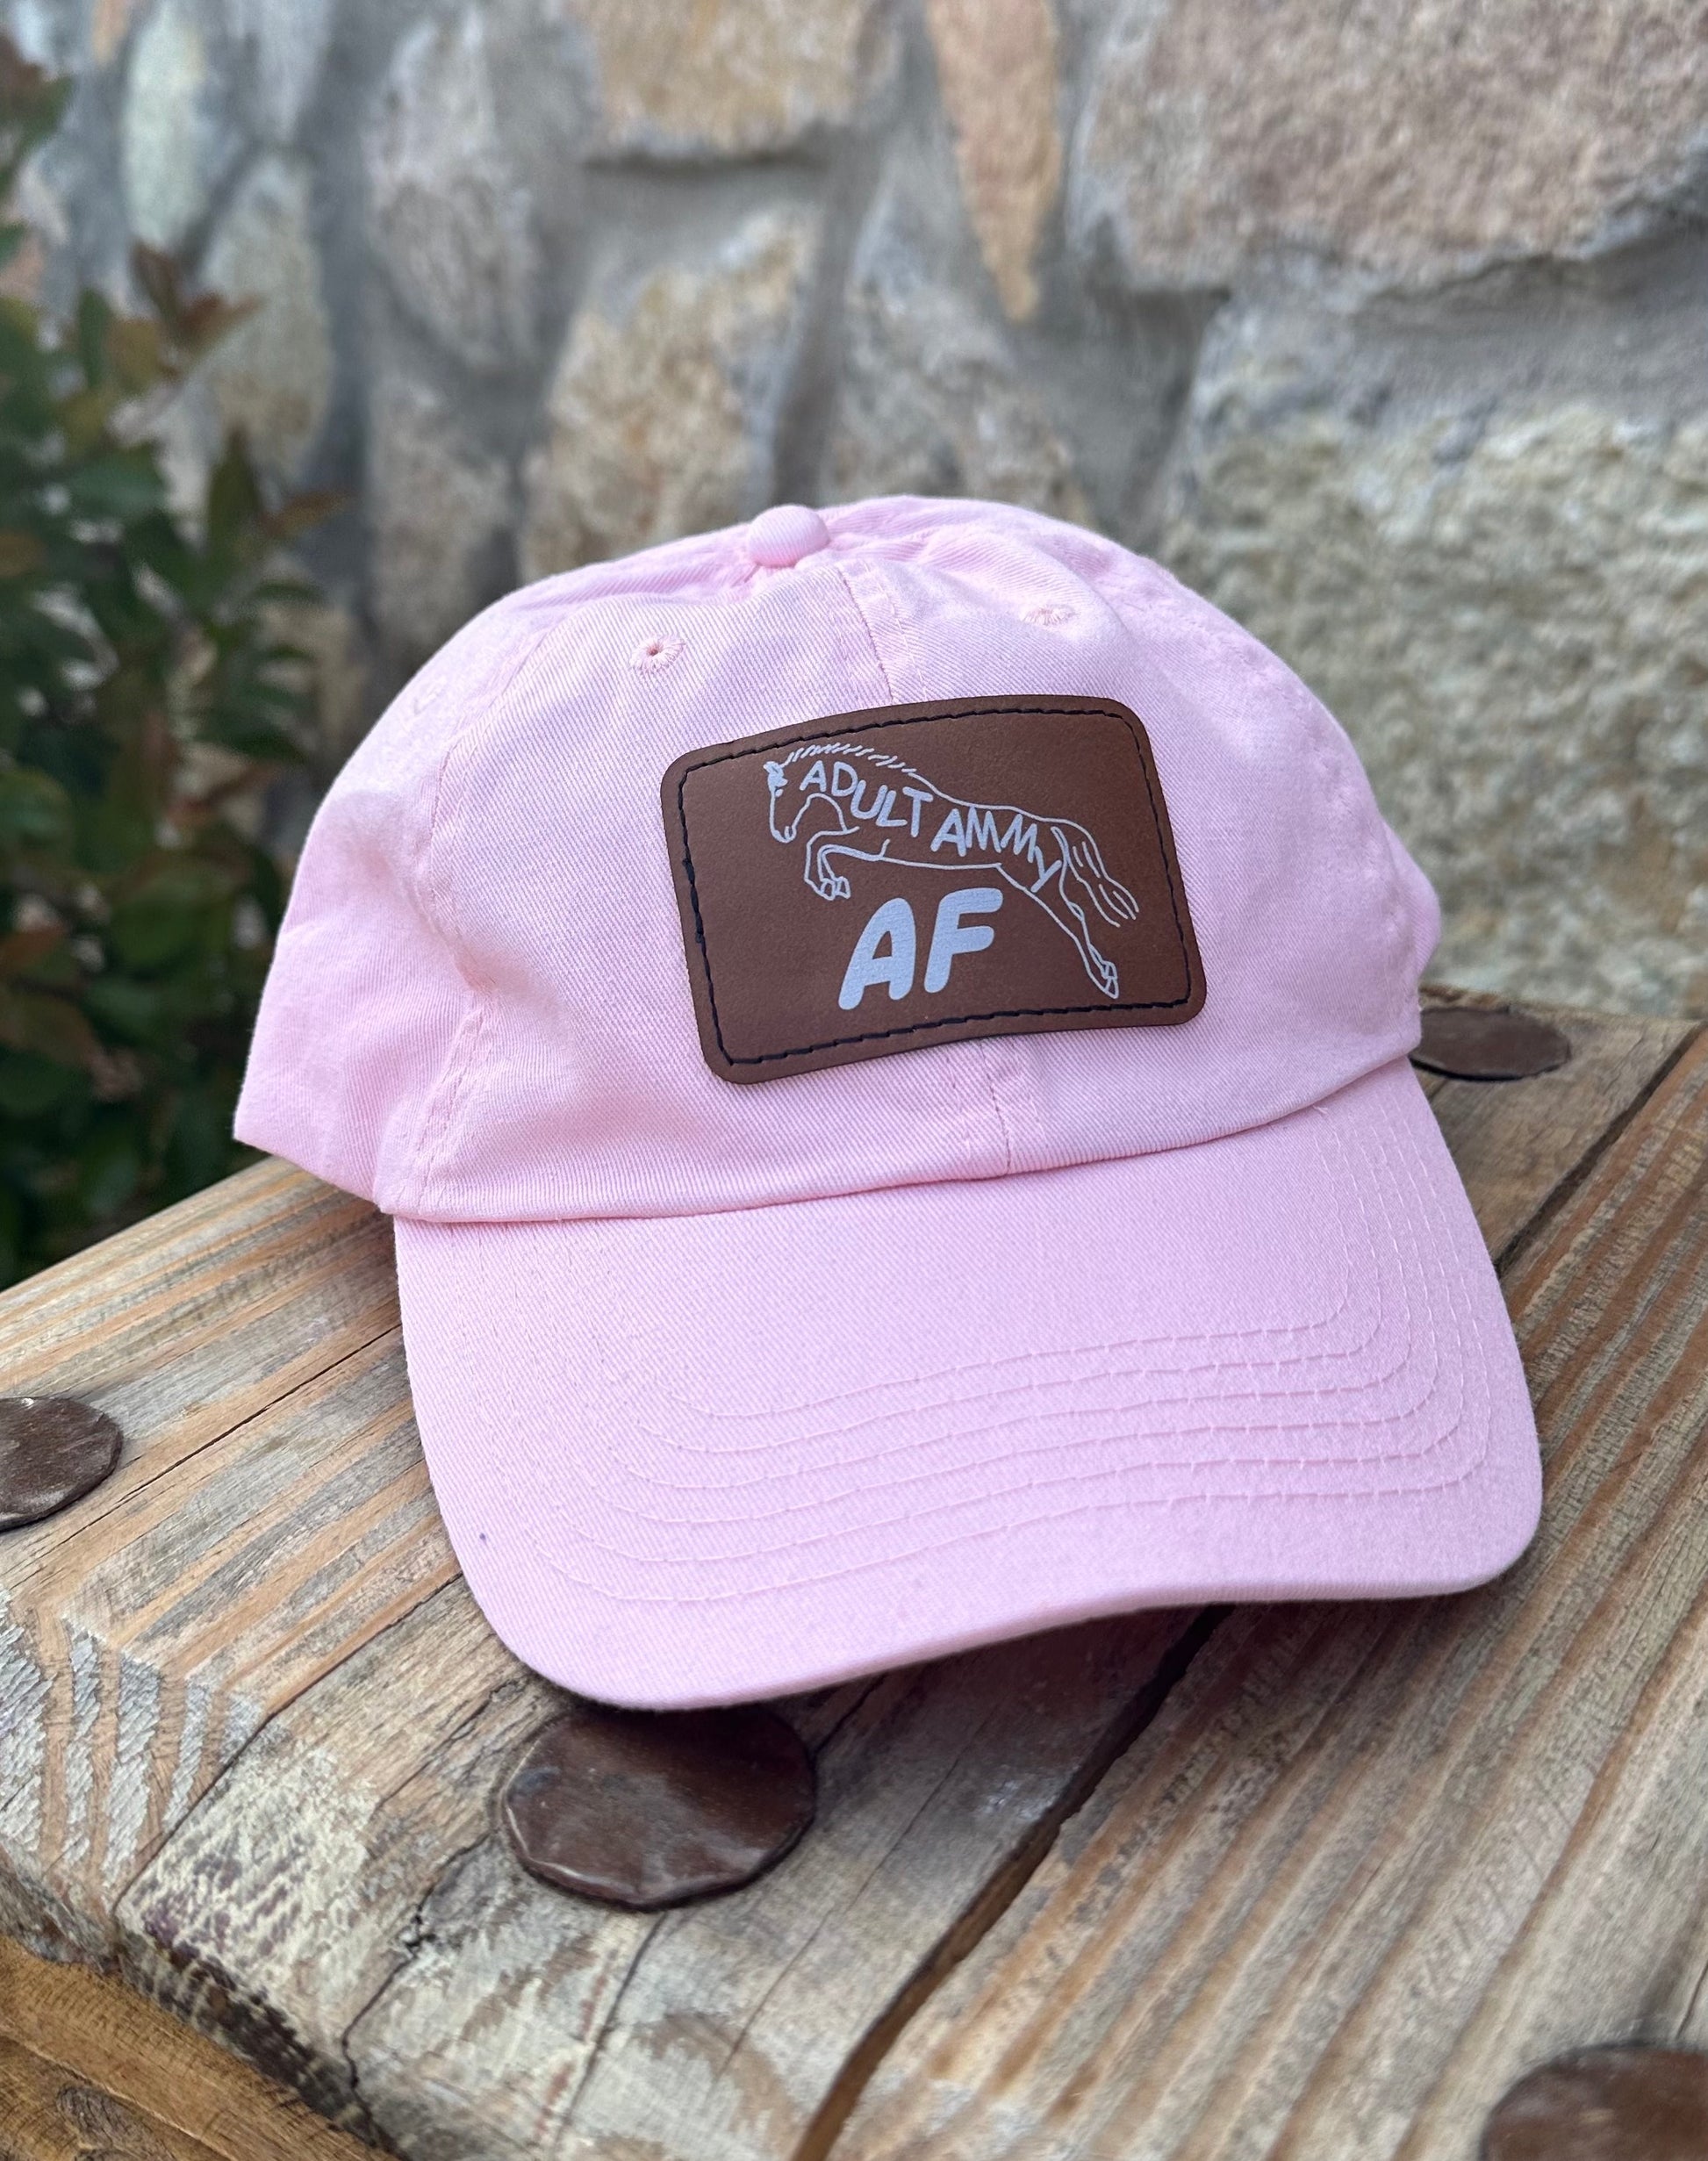 Light pink hat with brown leather patch with design of jumping horse and text Adult Ammy AF